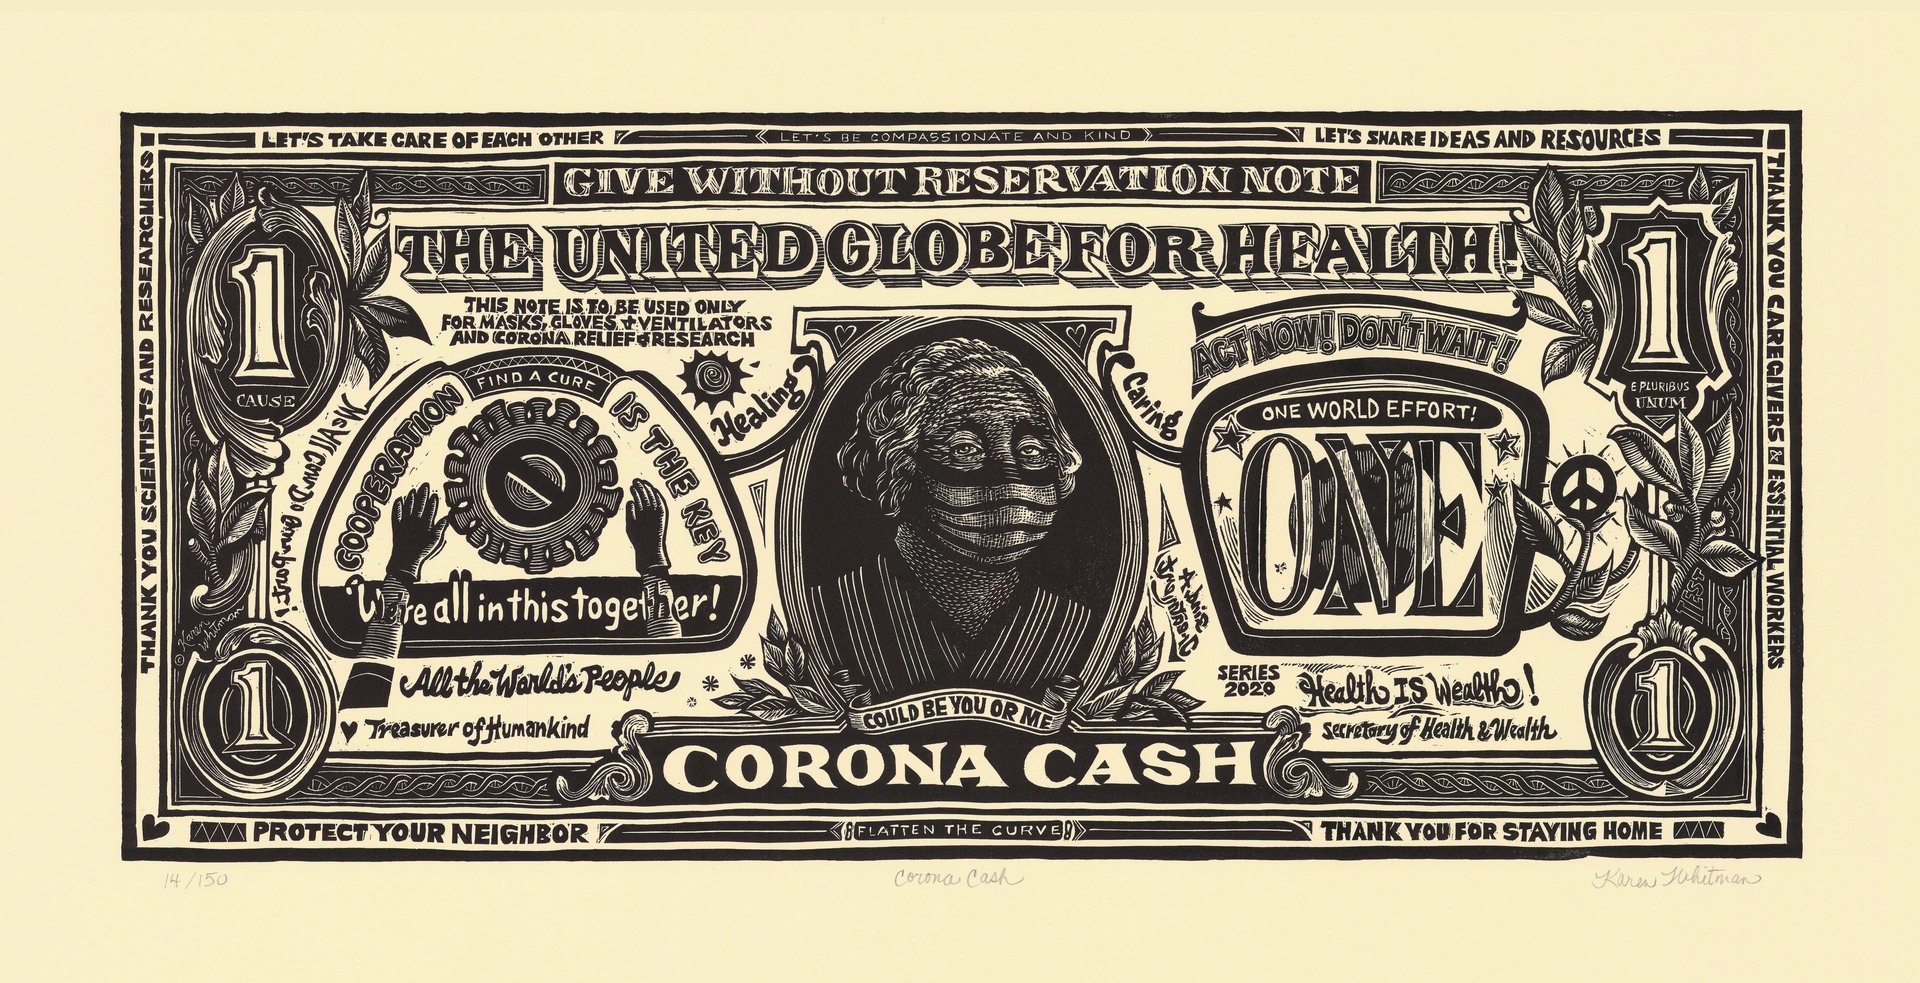 Karen Whitman created this linoleum block print of a dollar bill with messages of unity in coping with the Covid 19 pandemic. “The United Globe for Health,” “Give Without Reservation.” are two of the multiple messaged inscribed on the not, which also features a masked George Washington.